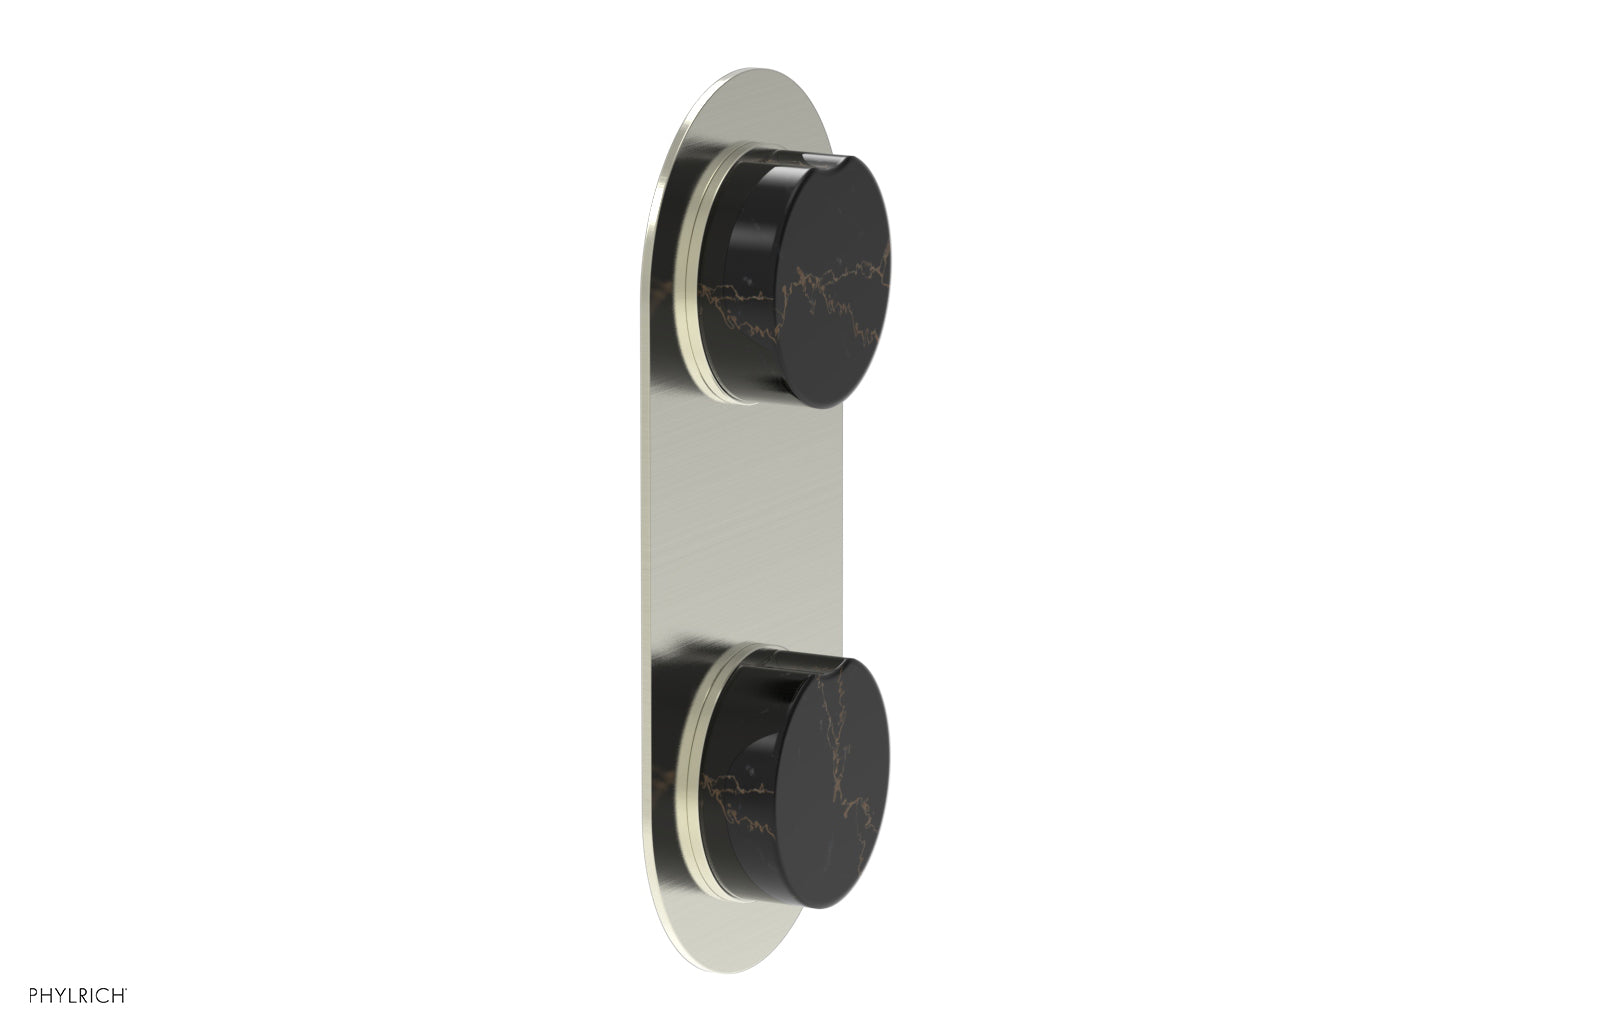 Phylrich CIRC Thermostatic Valve with Volume Control or Diverter - Black Marble Handle